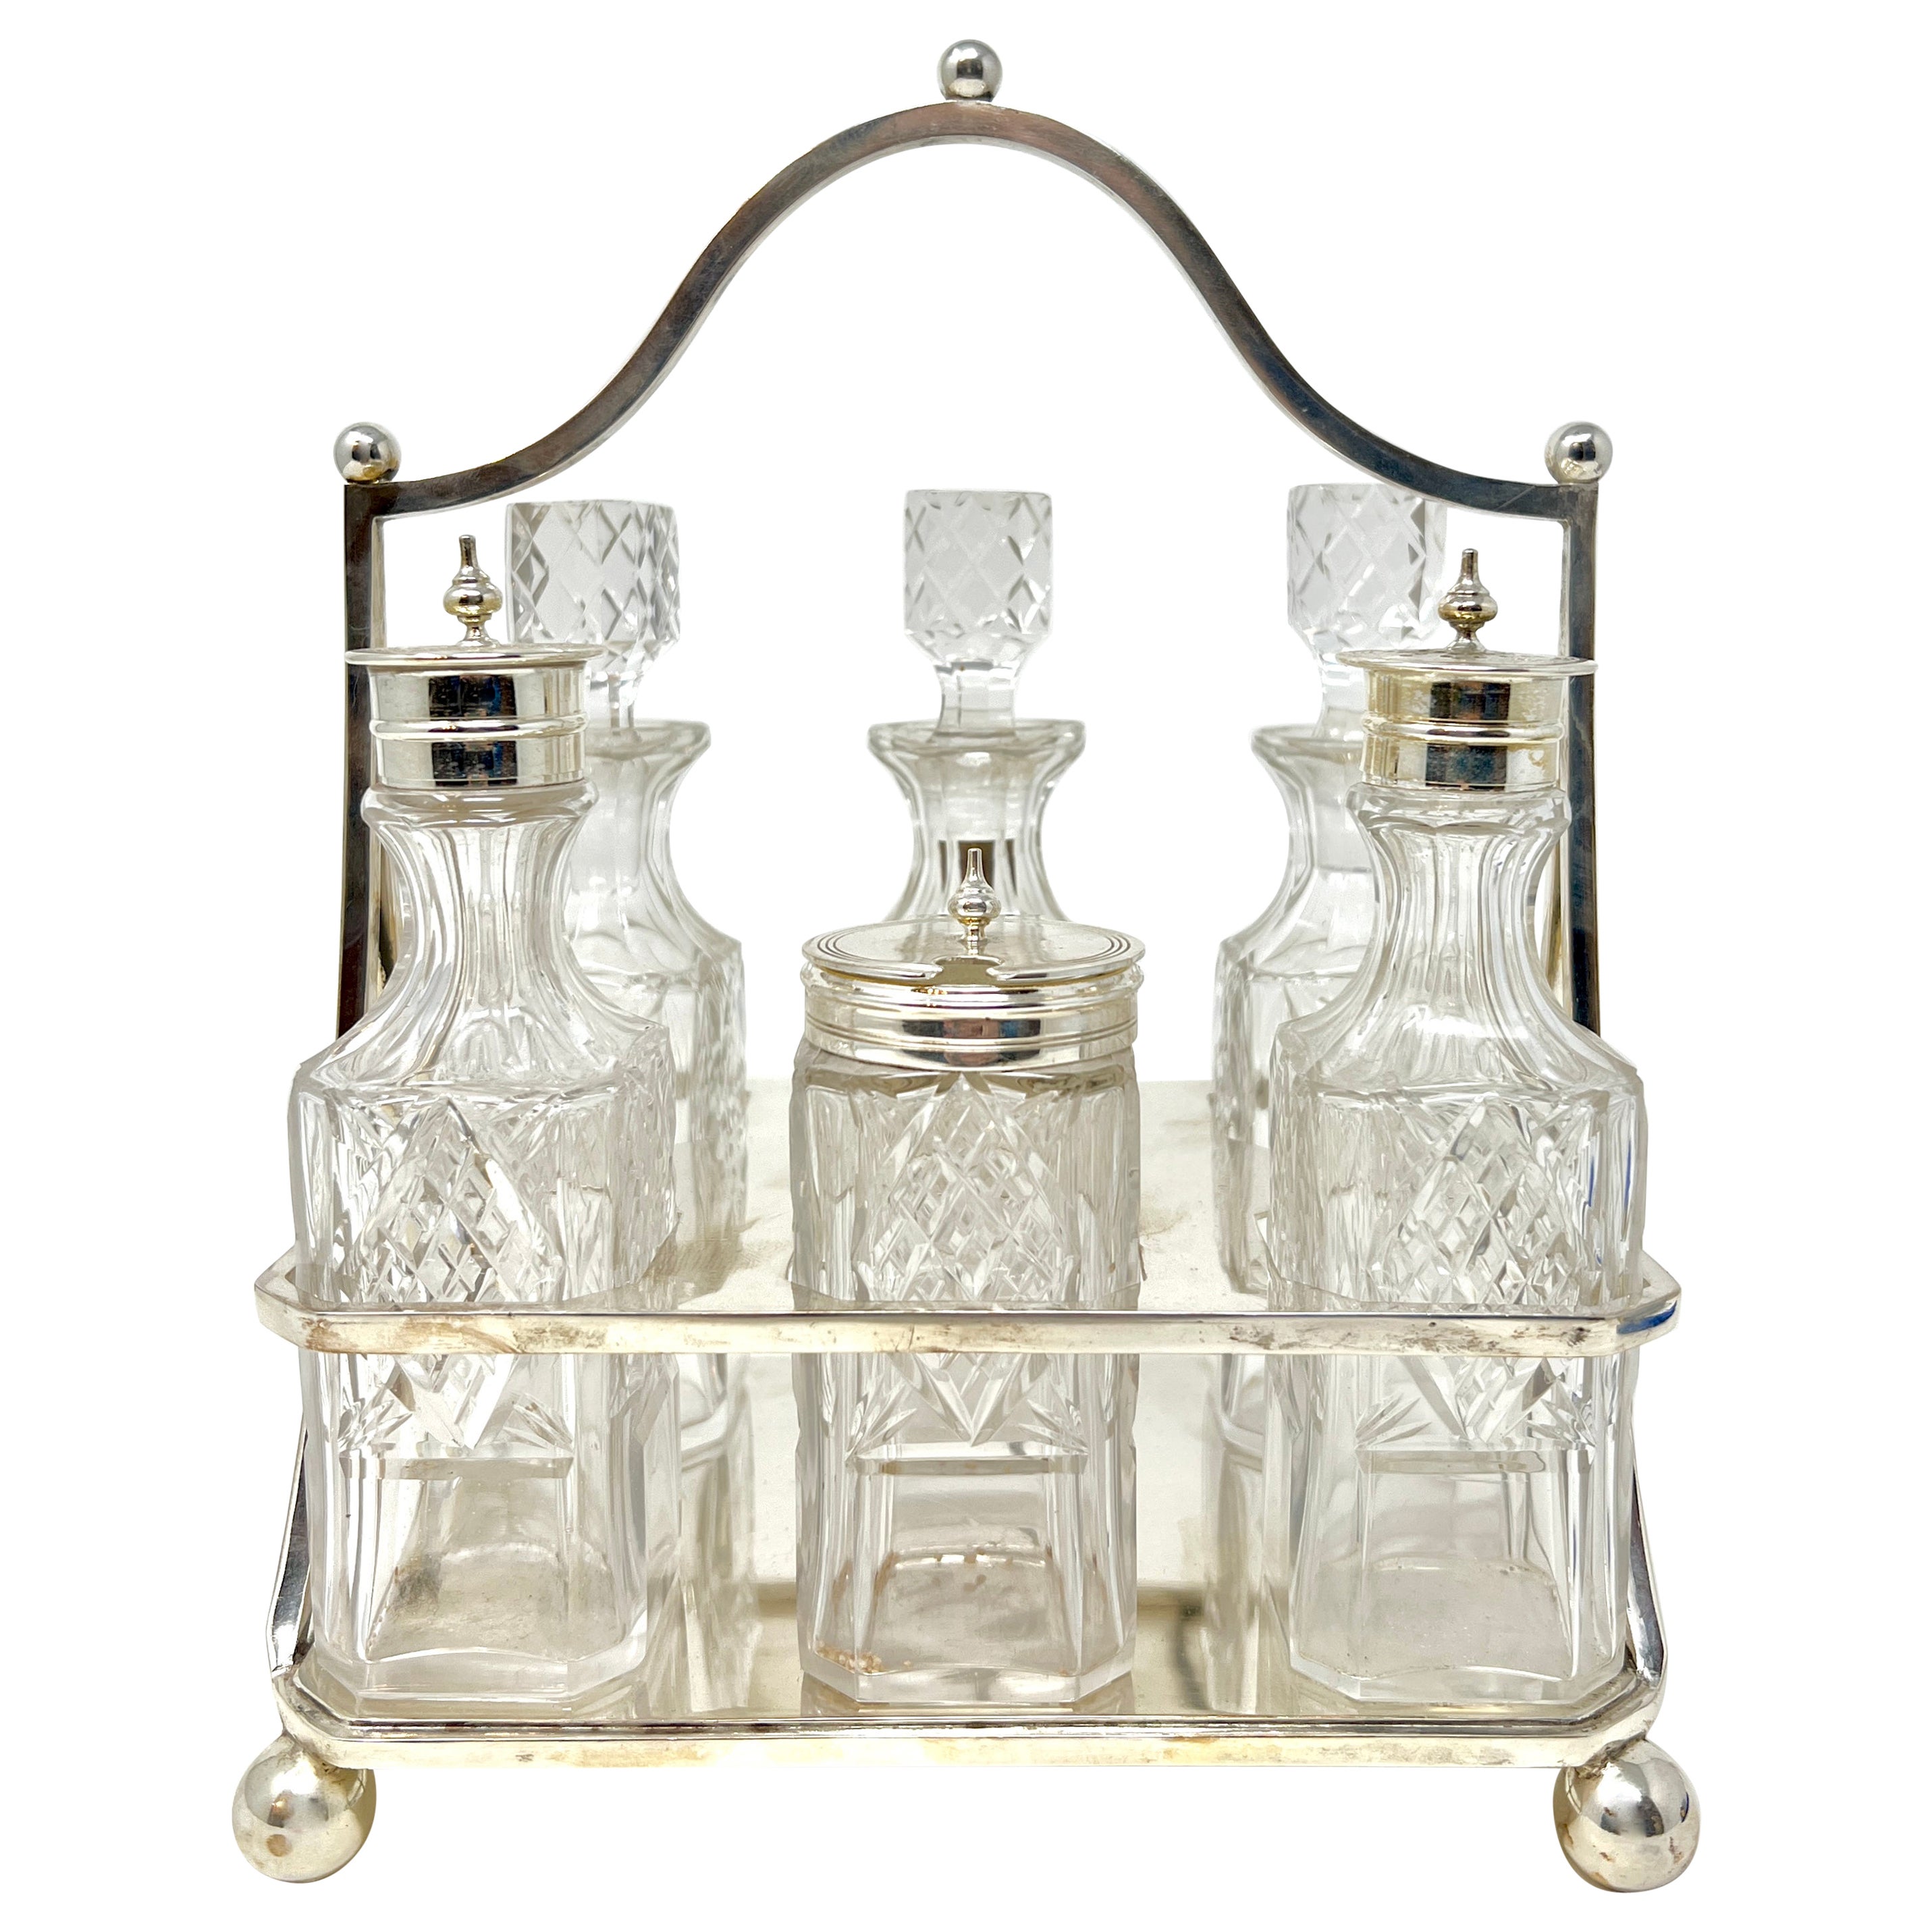 Antique English Silver Plate and Cut Crystal Cruet Set, Circa 1880-1890. For Sale